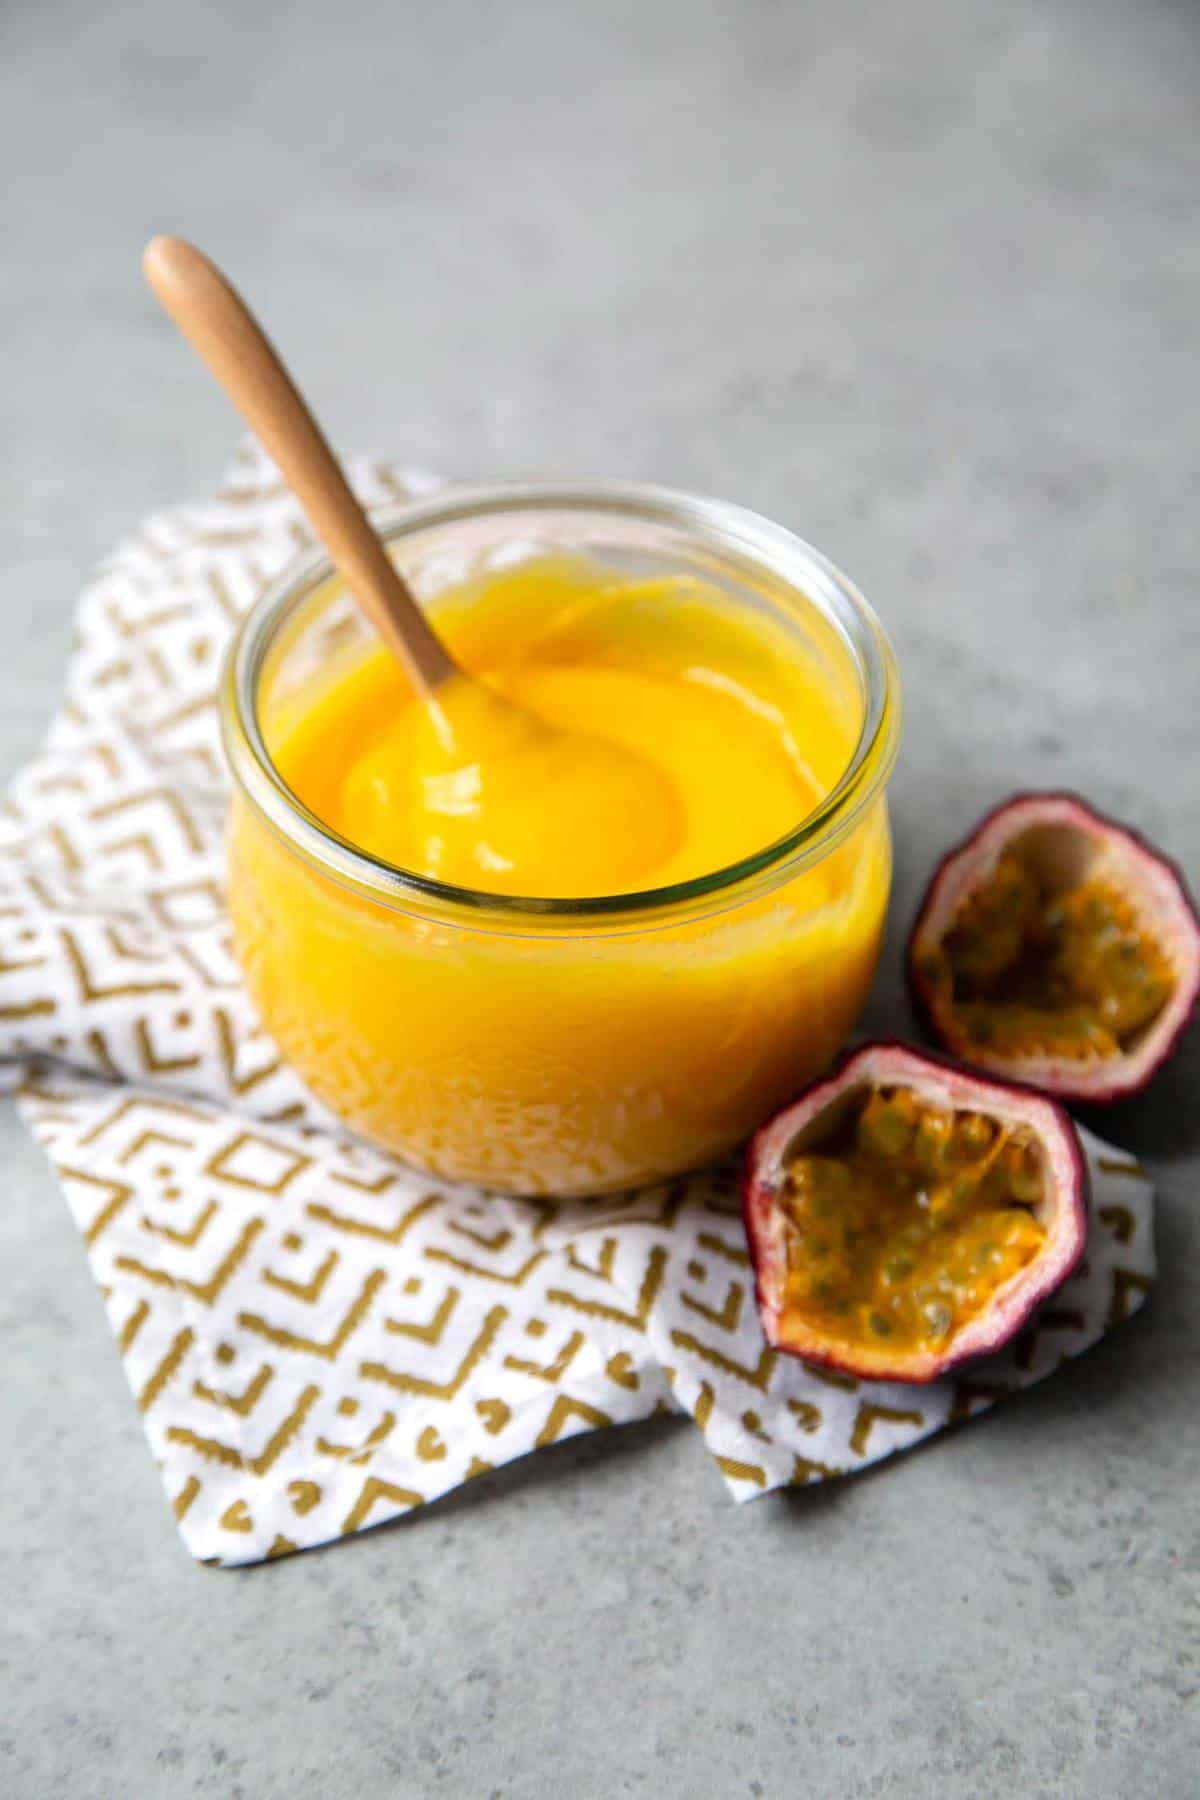 Passion Fruit from A to Z: 26 Things to Know